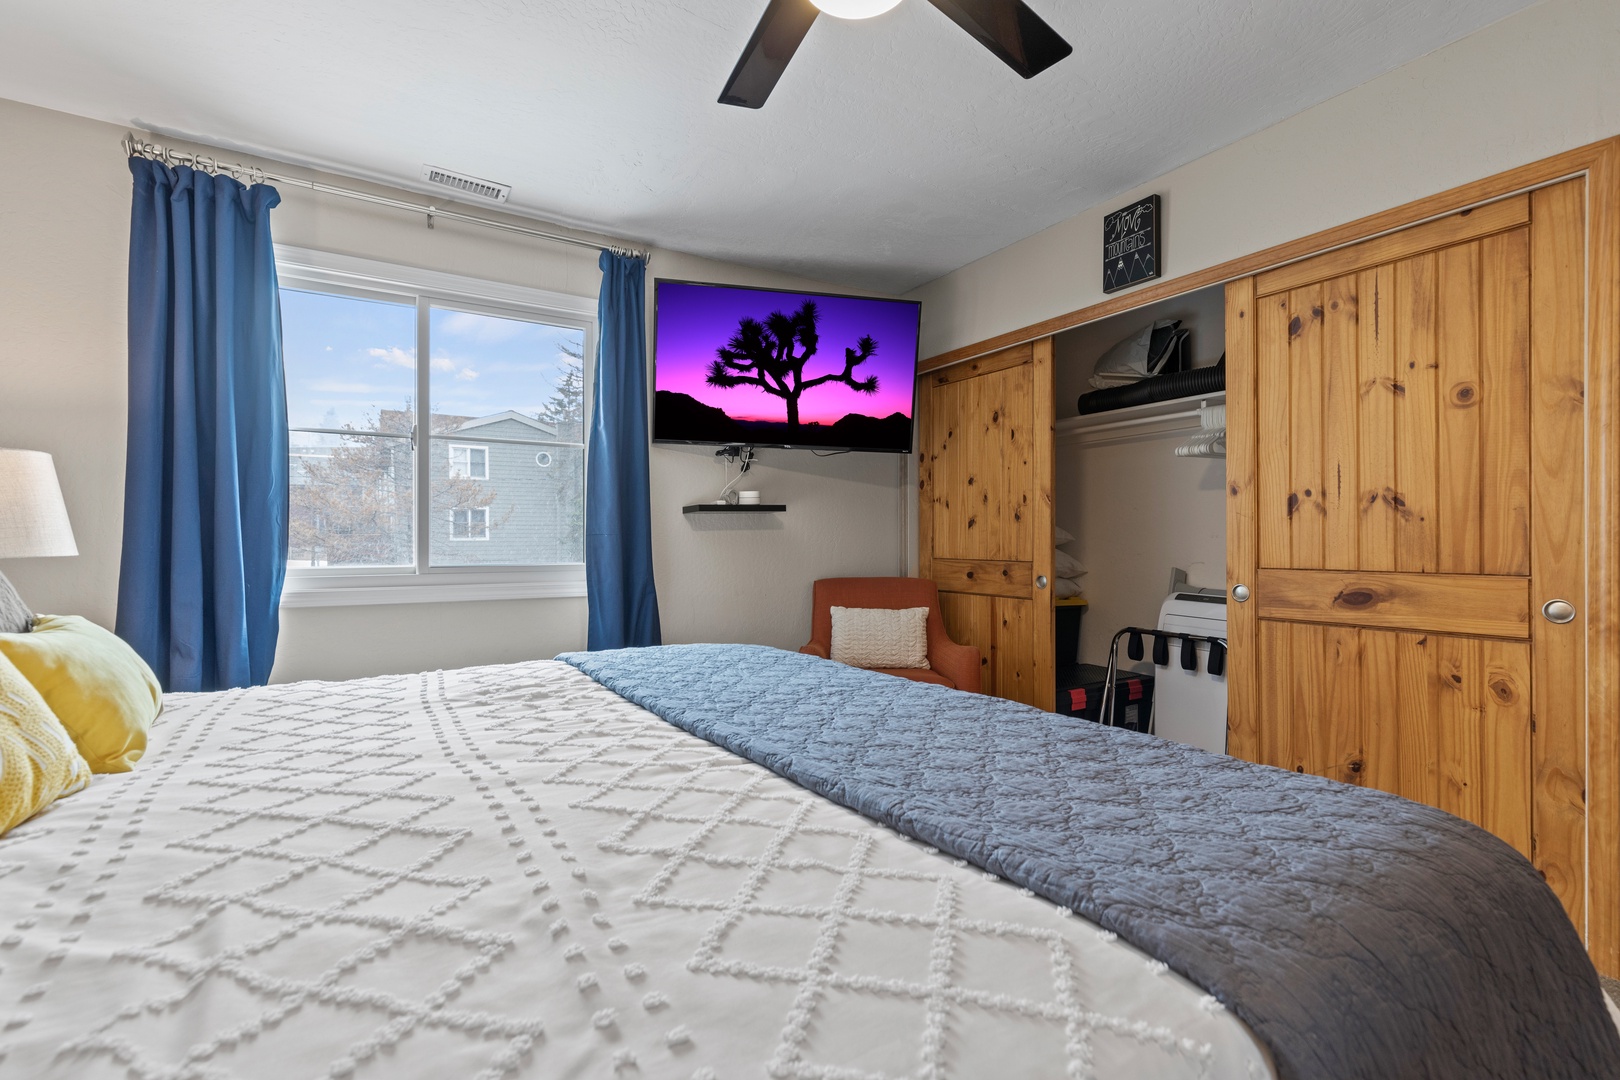 Park City Vacation Rentals, Park City Bungalow on Park Ave - This bedroom boasts a 55" flat-screen TV and a roomy closet, providing plenty of storage space for your stay